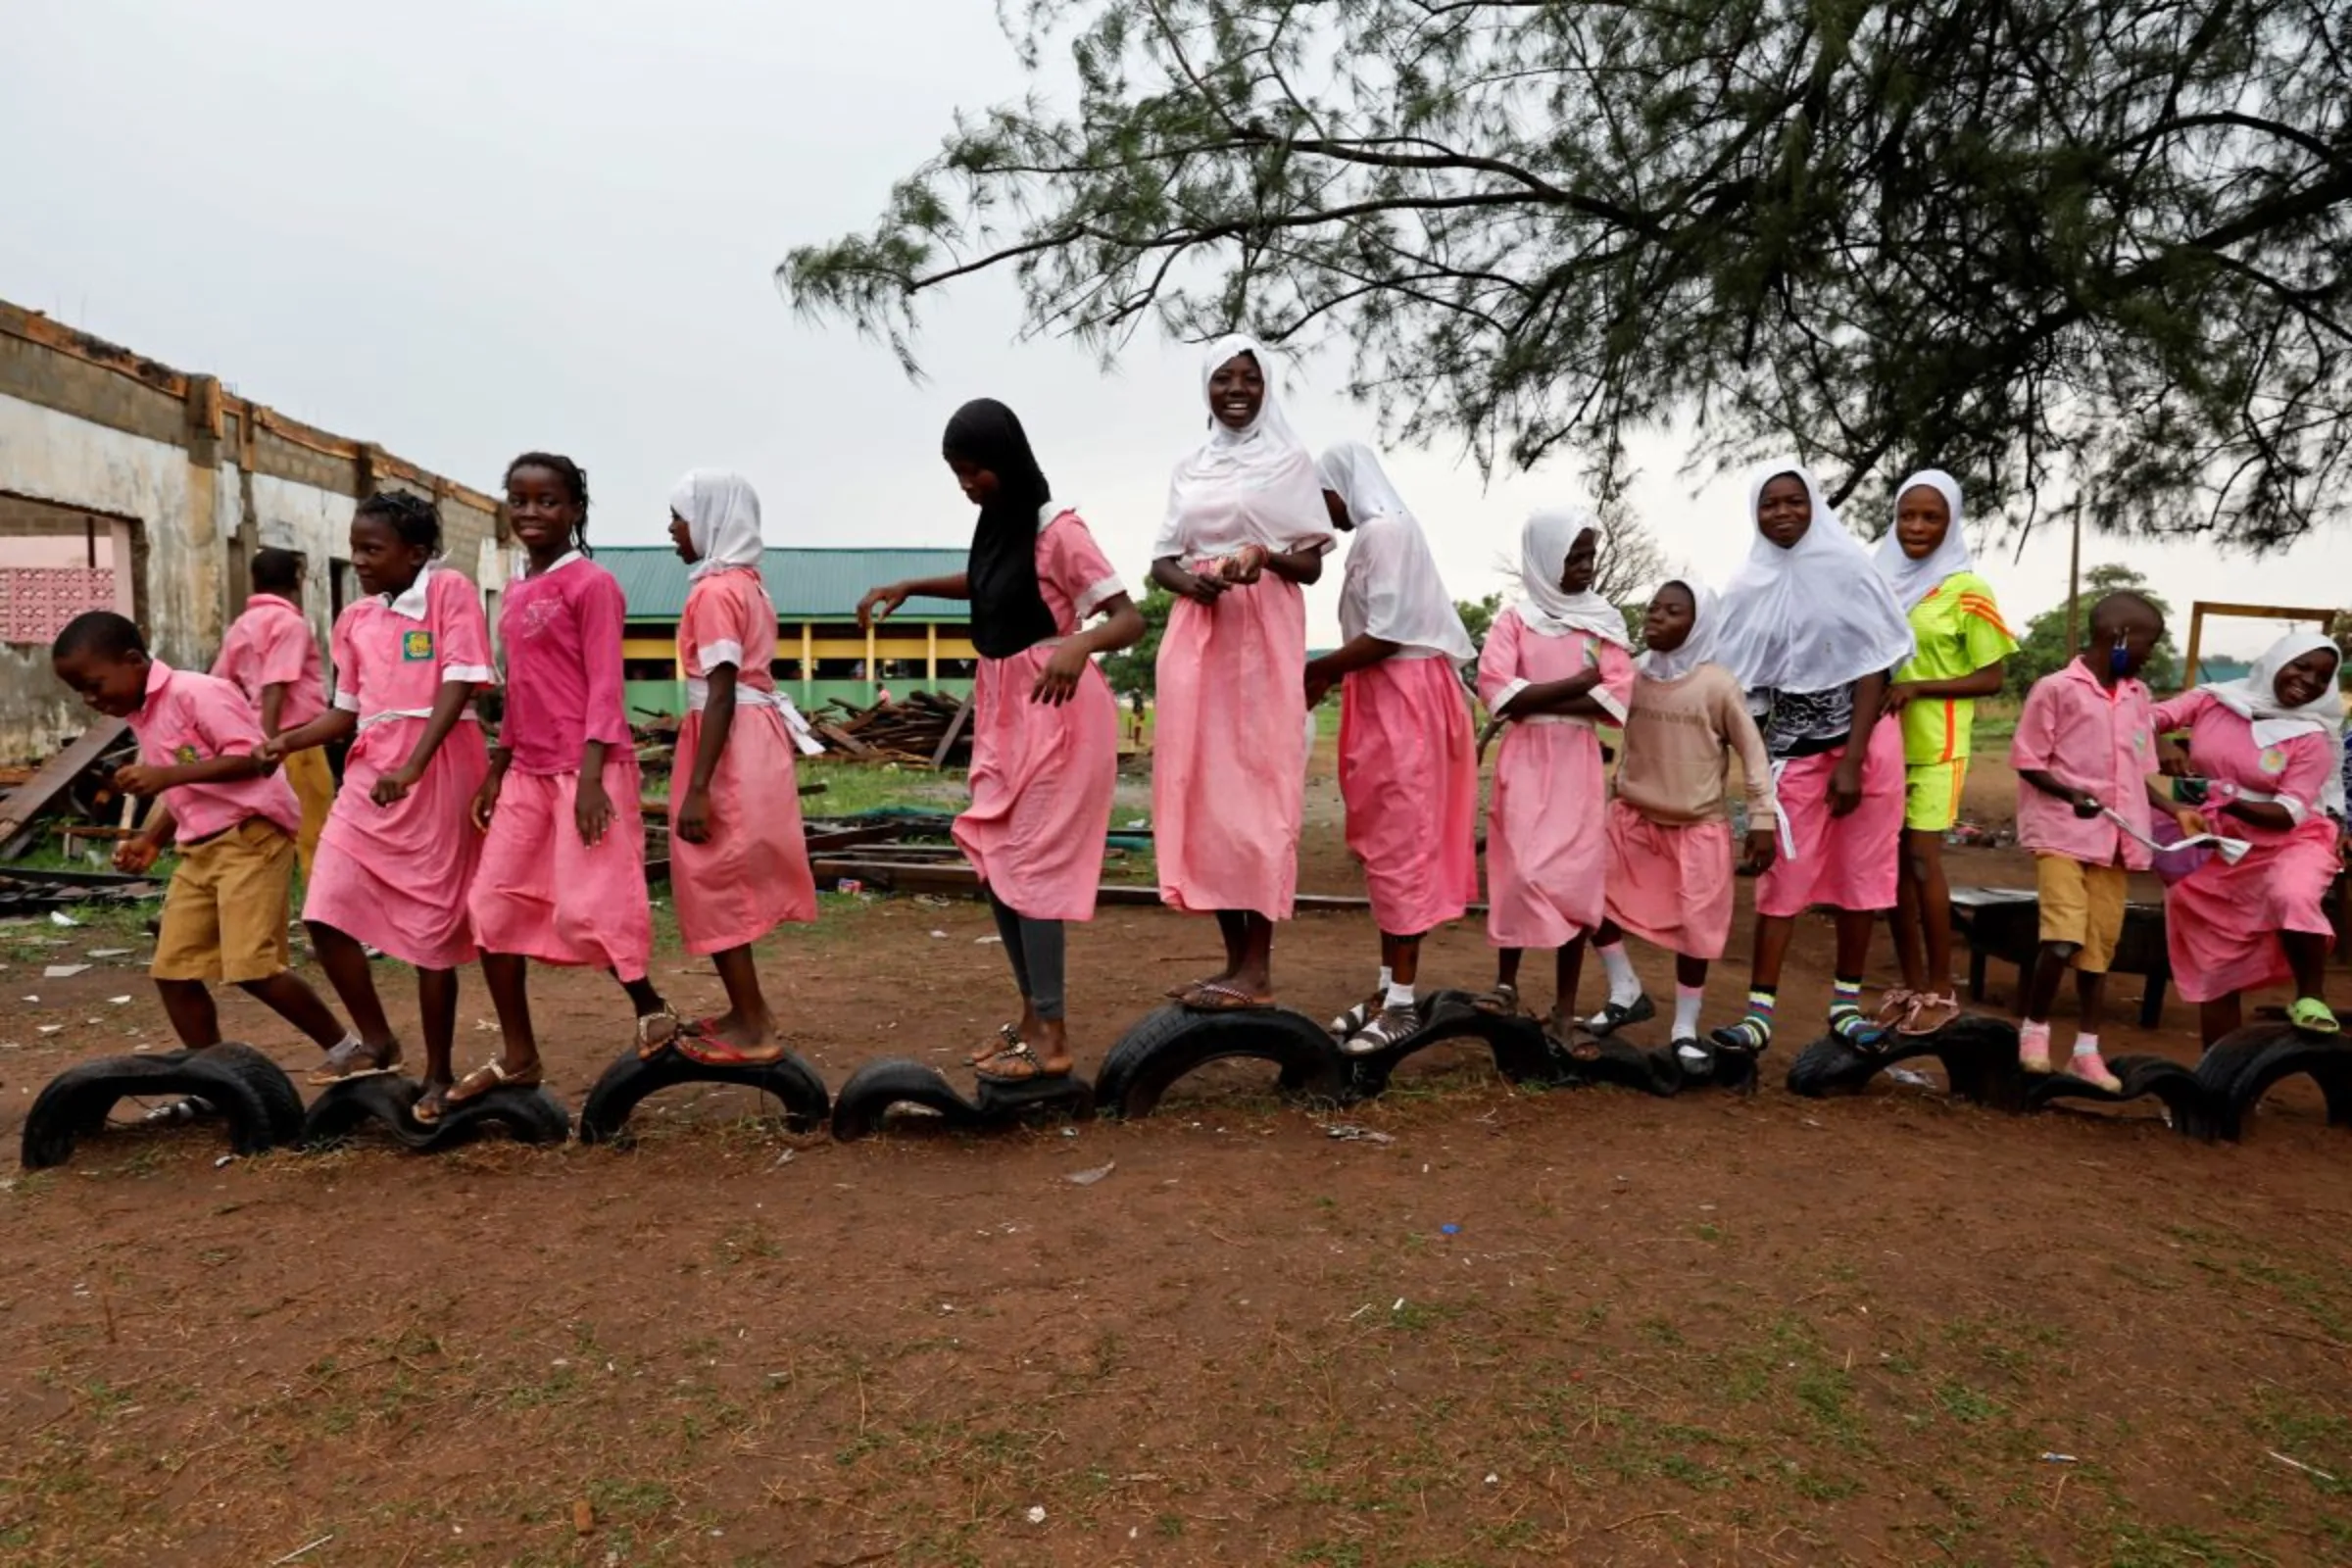 Students stand on tyres in school playground, Kwara state, Nigeria, March 24, 2021. REUTERS/Temilade Adelaja